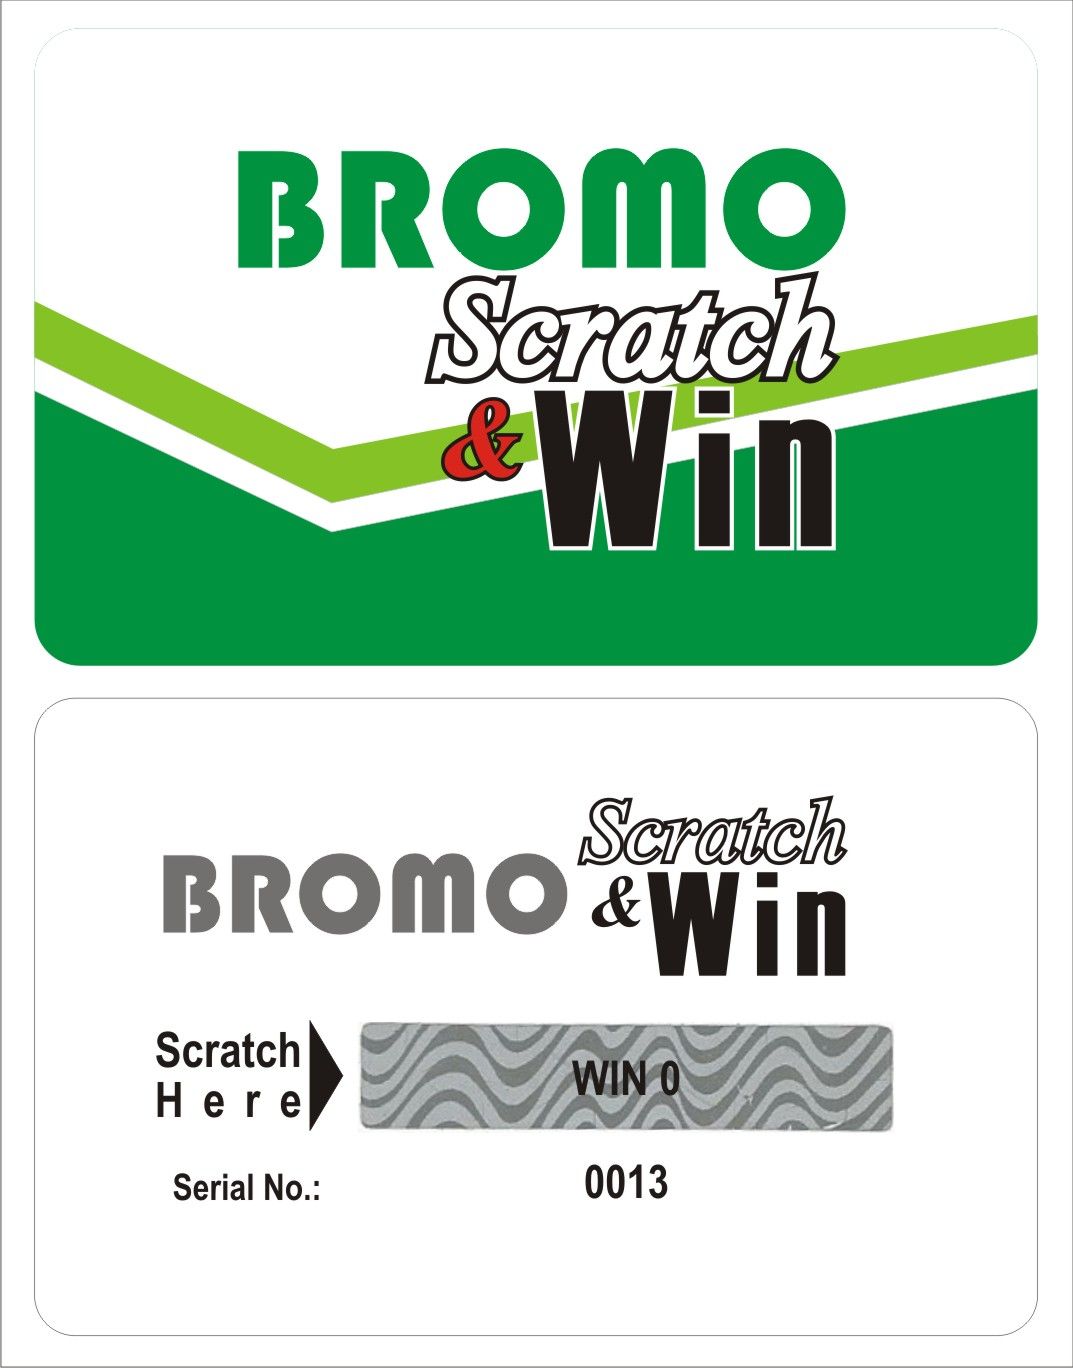 SCRATCH AND WIN PROMO CARDS PRINTING CALL EMMANUEL ON 08176499649